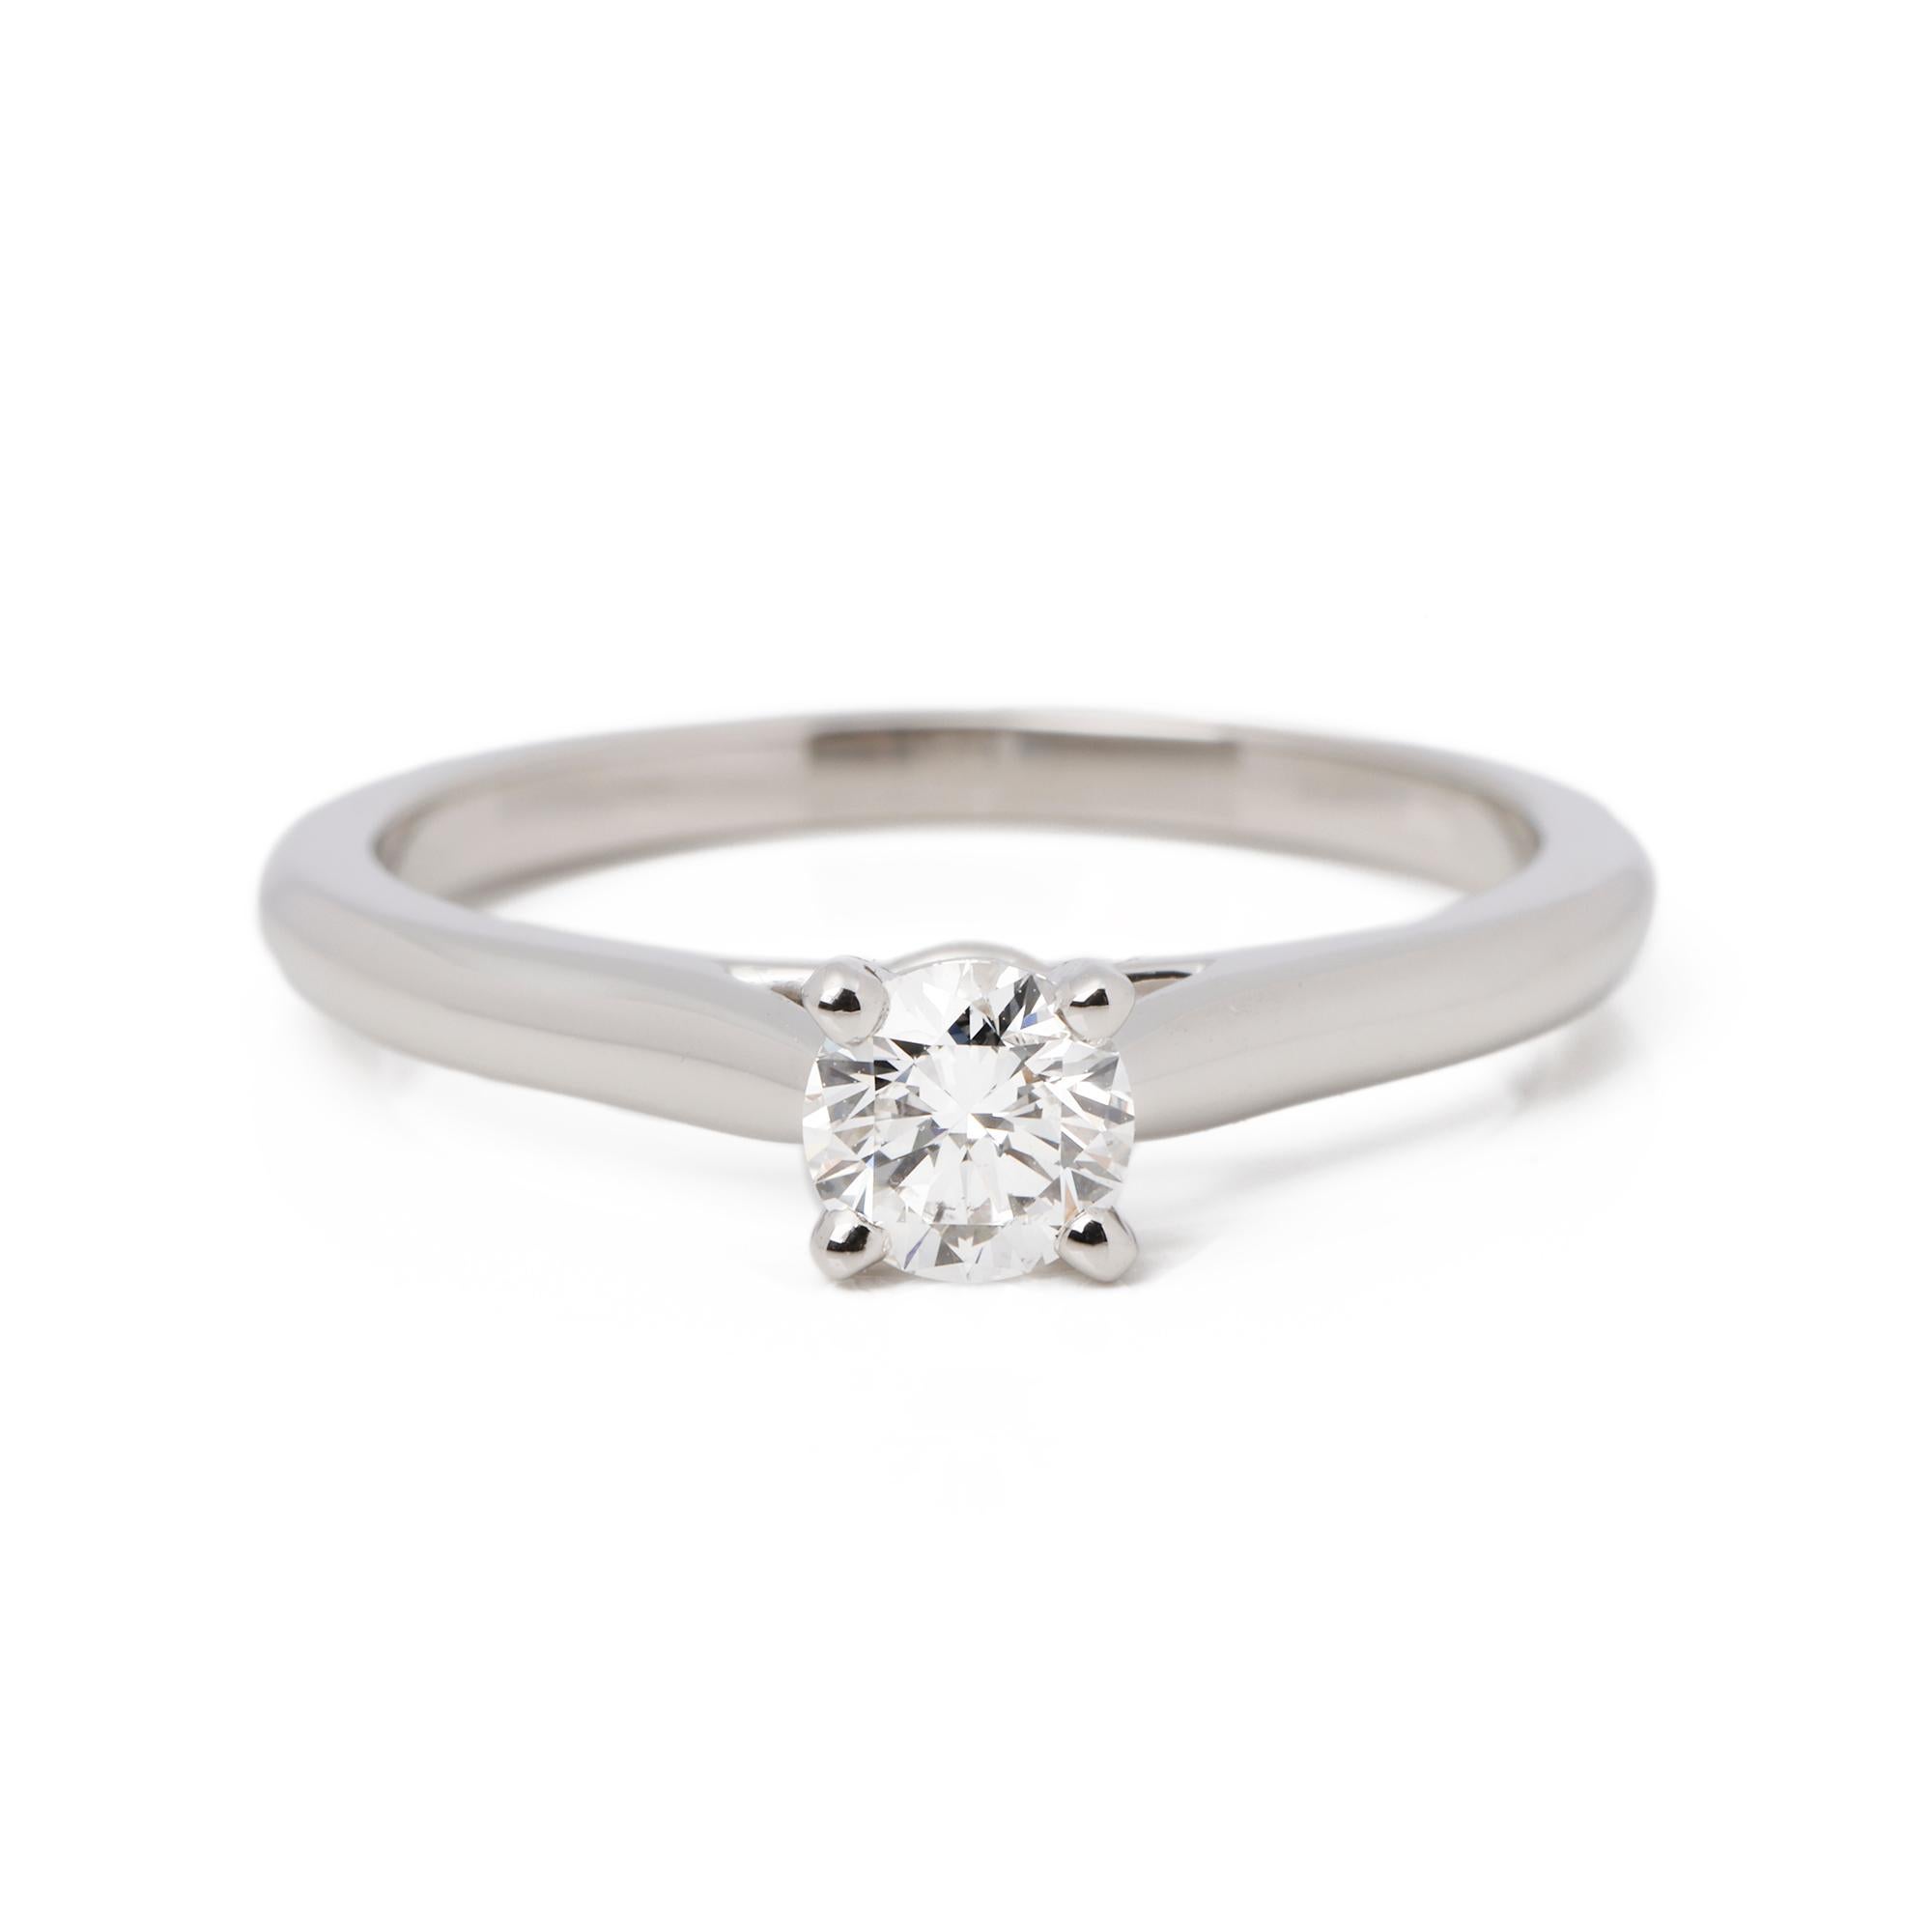 Cartier Brilliant Cut 0.30ct Solitaire Diamond Platinum 1895 Ring

Brand Cartier
Model 0.30ct Diamond 1895 Ring
Product Type Ring
Age Circa 2016
Accompanied By GIA Certificate
Material(s) Platinum
Gemstone Diamond
UK Ring Size J 1/2
EU Ring Size